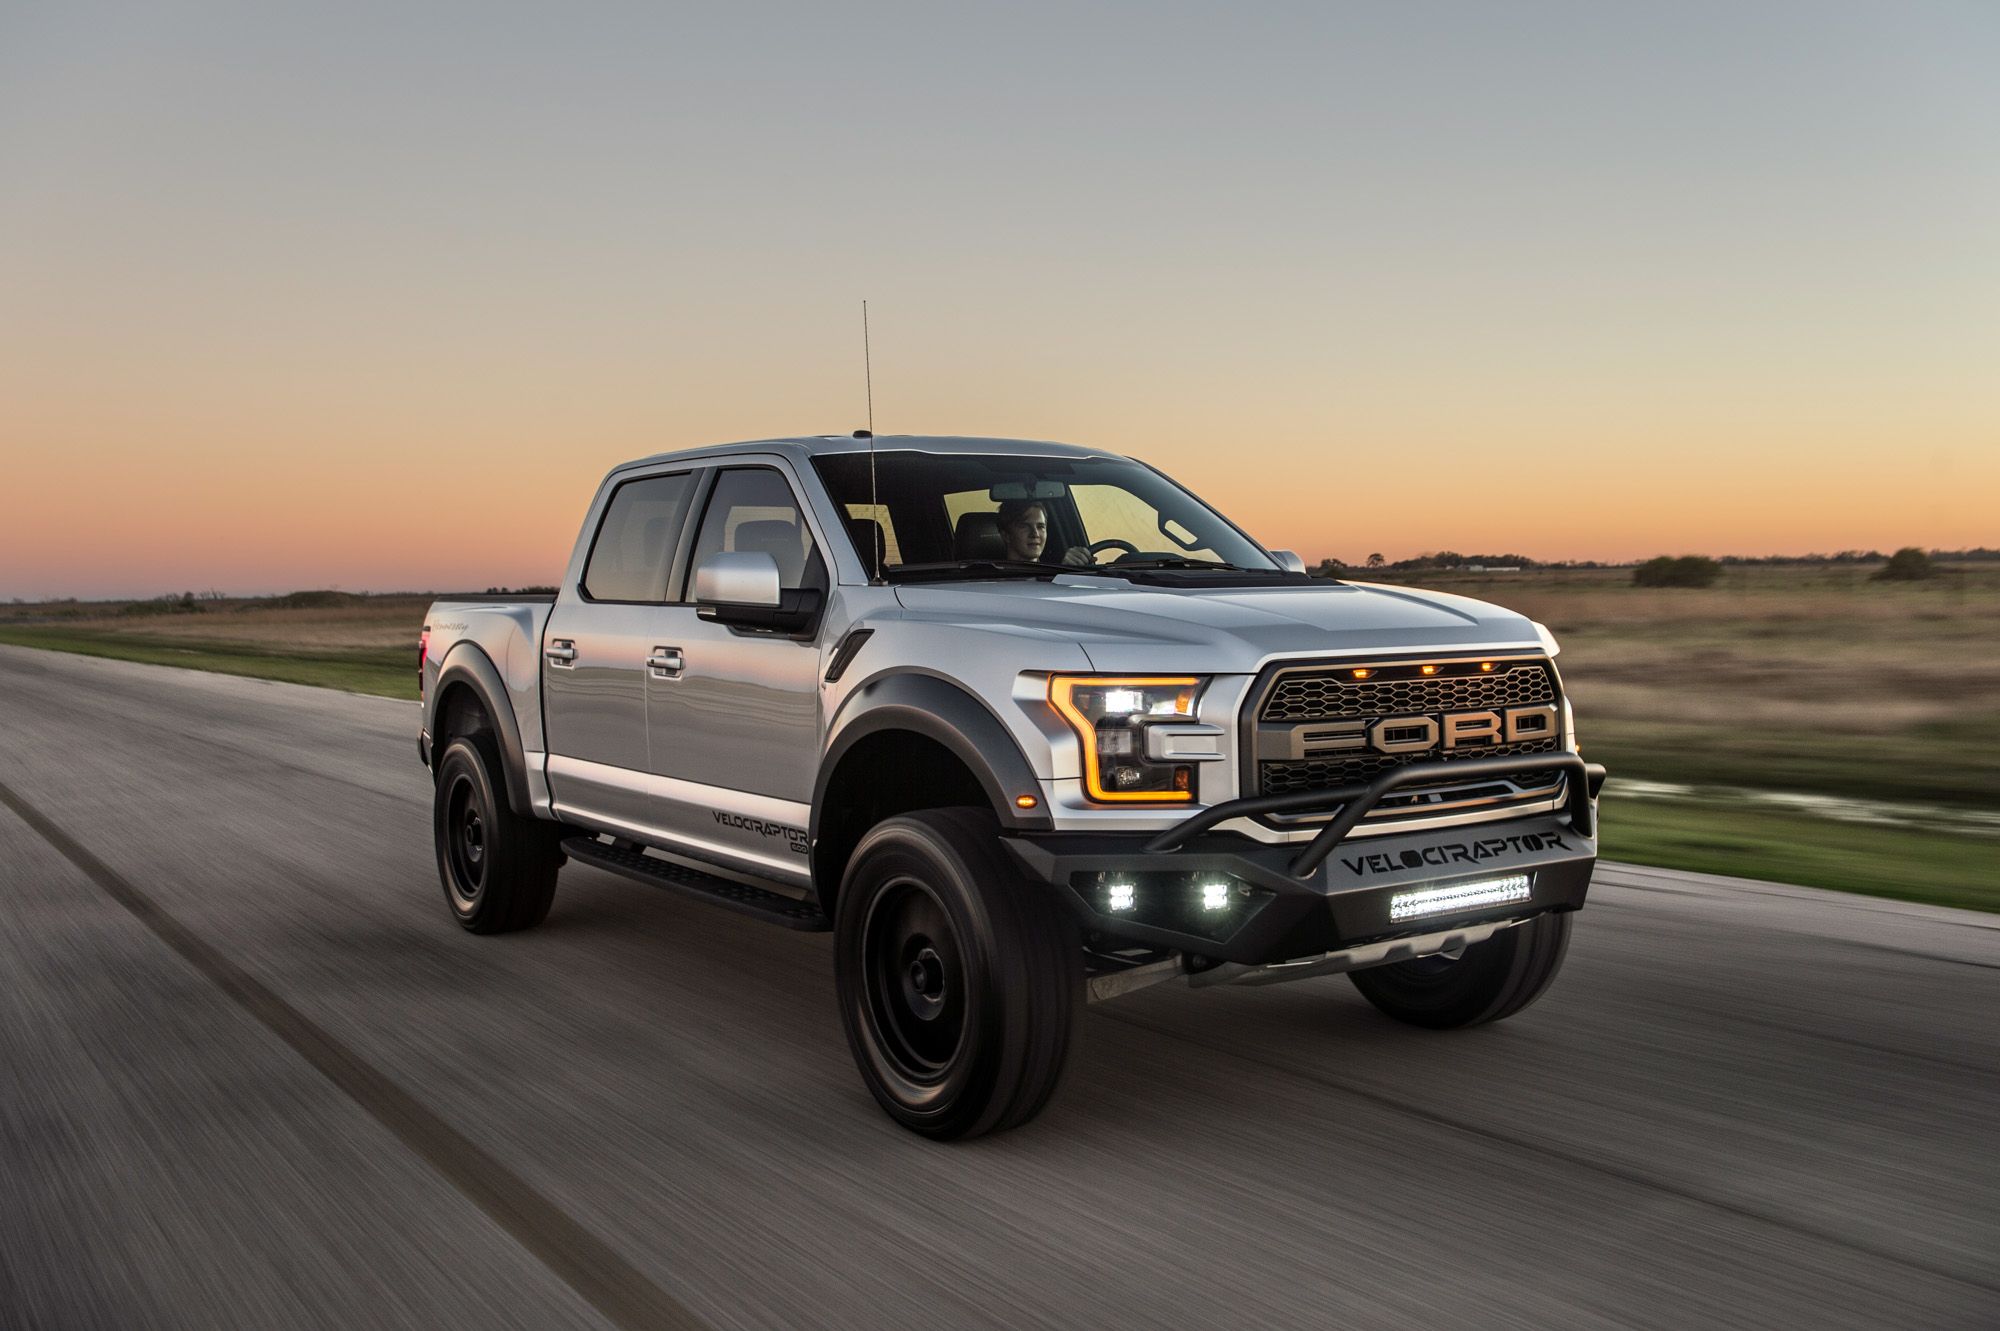 2017 Hennessey Squeezes 600 Horses From EcoBoost V-6 in 2017 VelociRaptor!